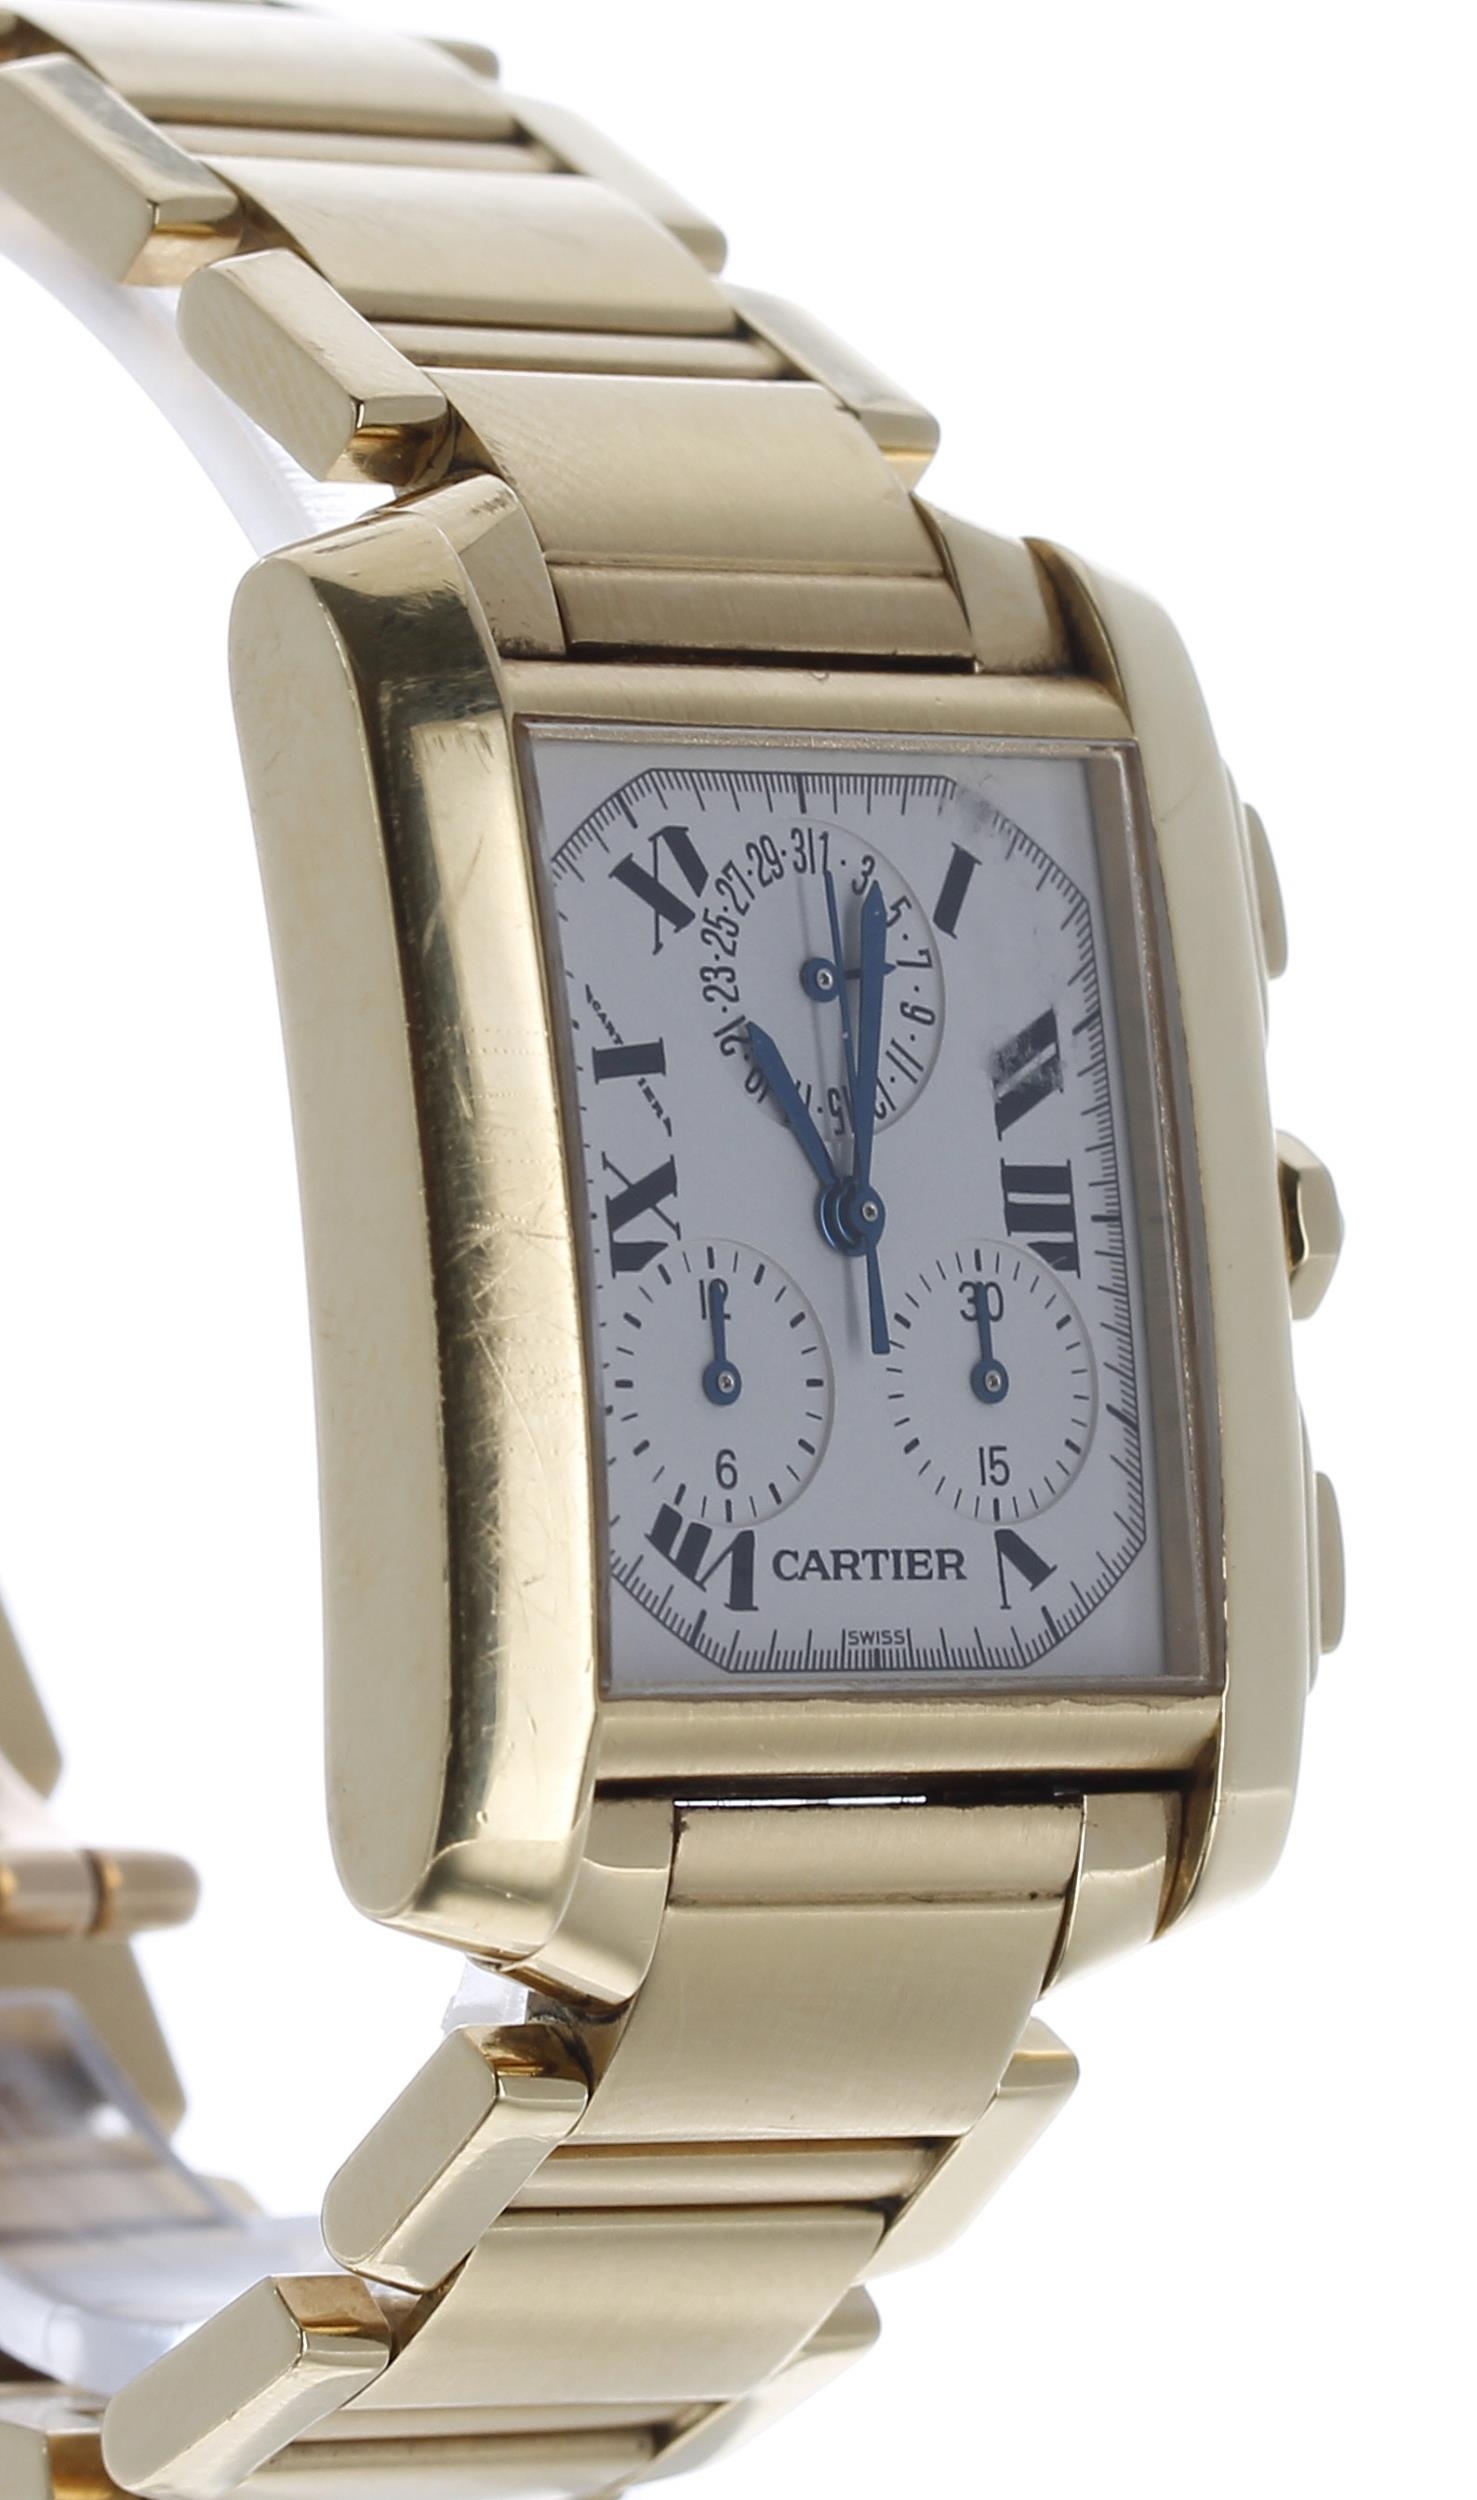 Cartier Tank Francaise Chronoflex 18ct gentleman's wristwatch, reference no. 1830, serial no. - Image 3 of 5